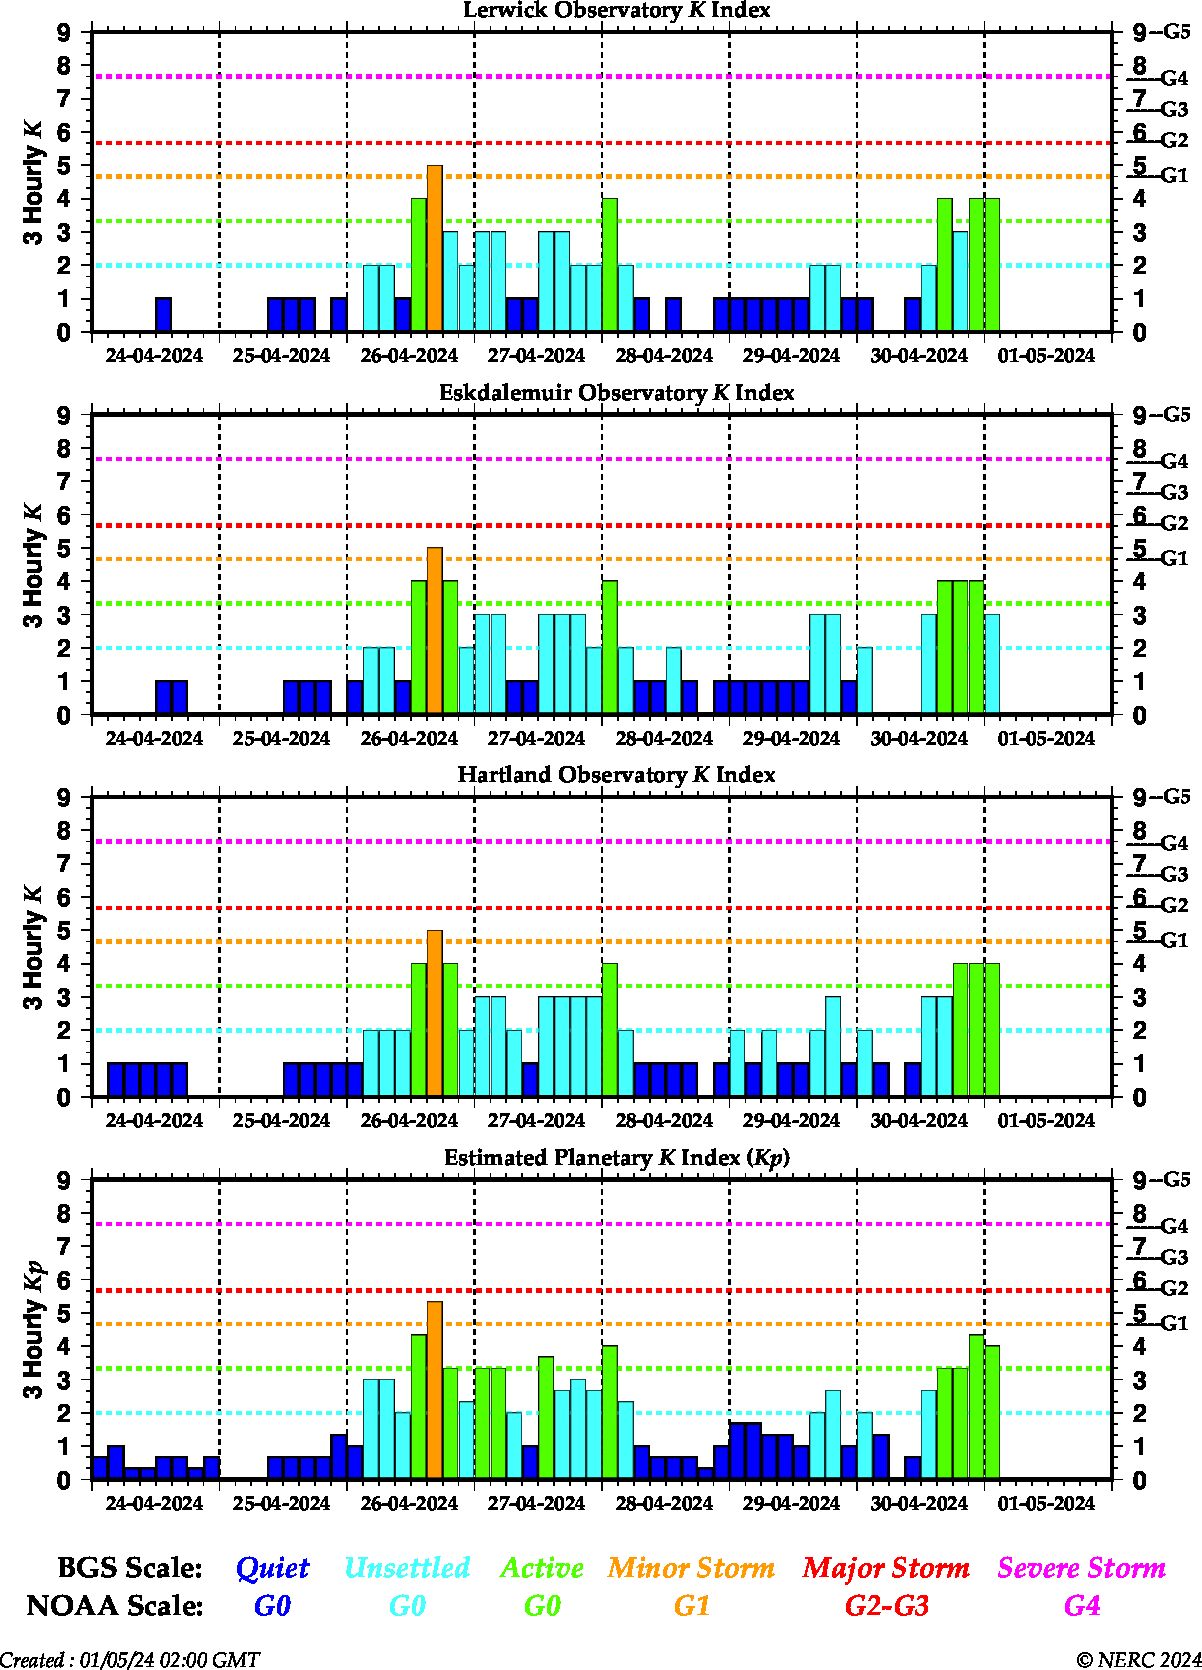 K indices for the UK observatories and global Kp